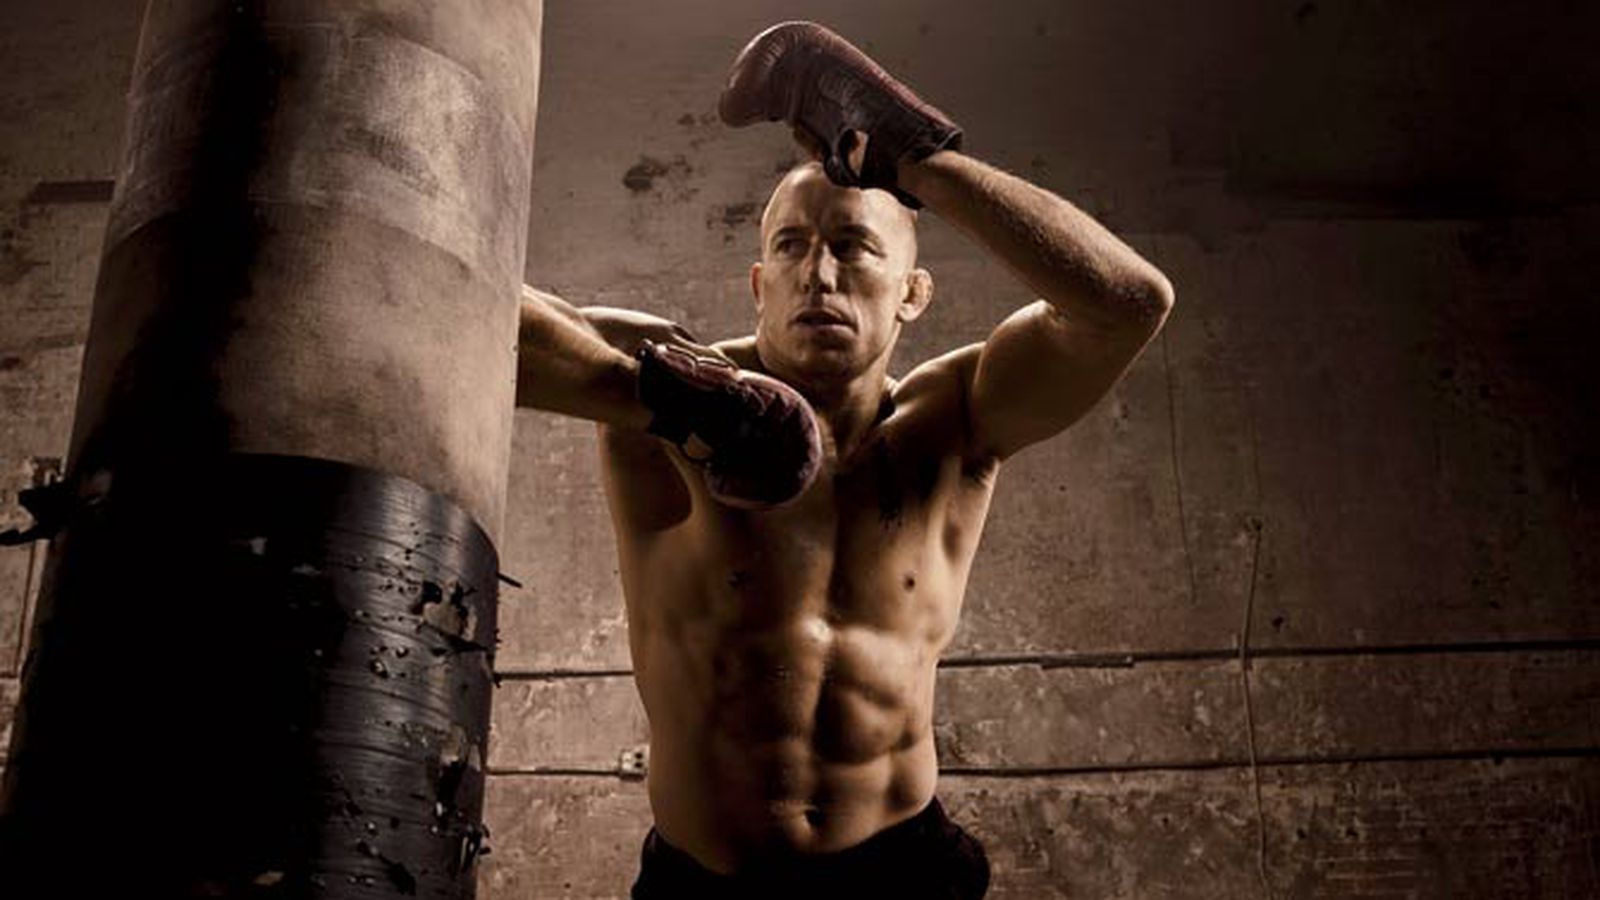 Georges St. Pierre planning his Octagon return for November 2012